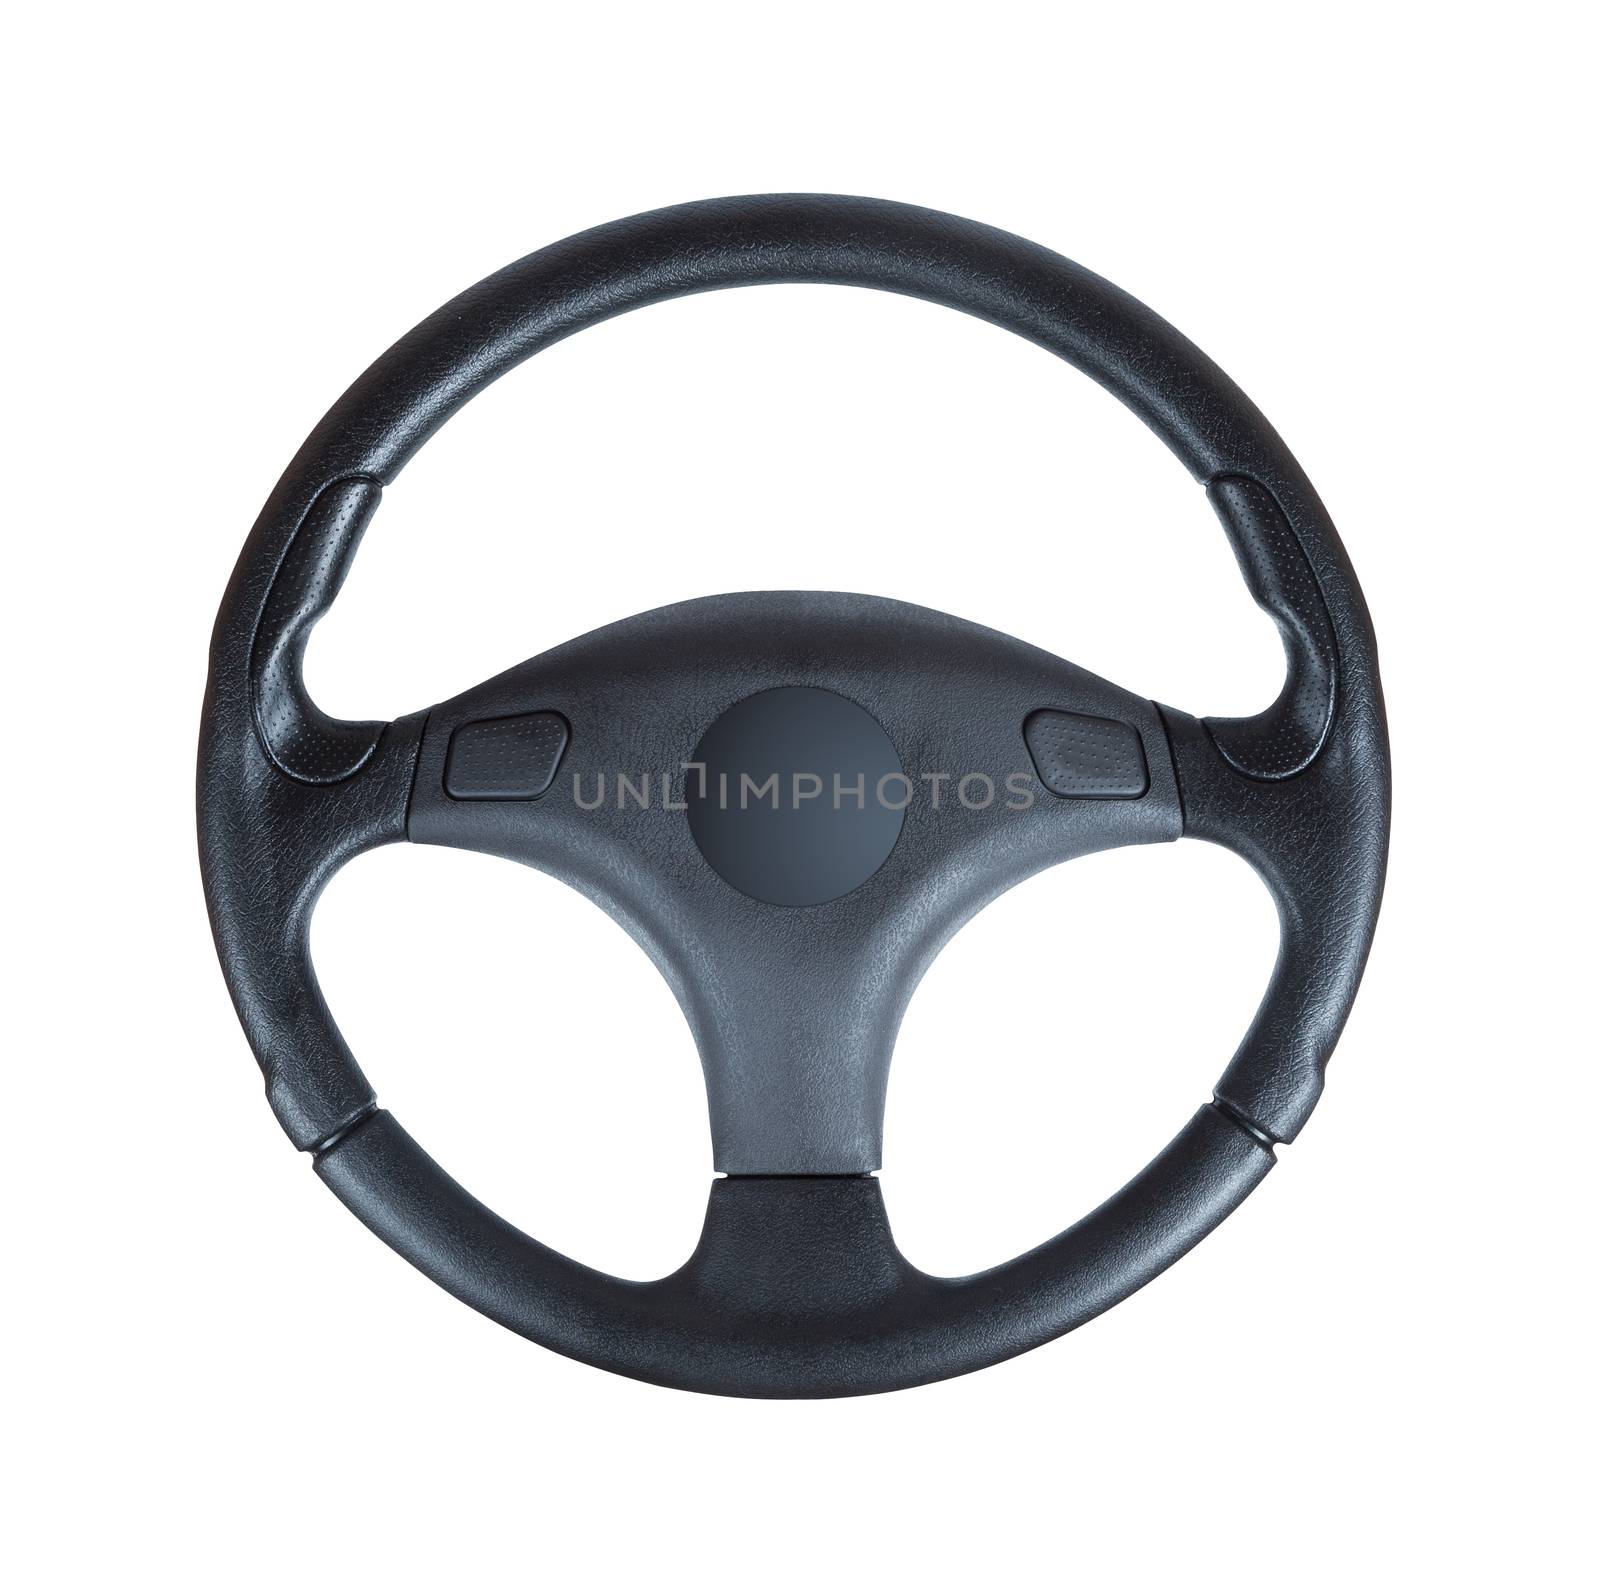 Steering wheel of a car isolated on white background